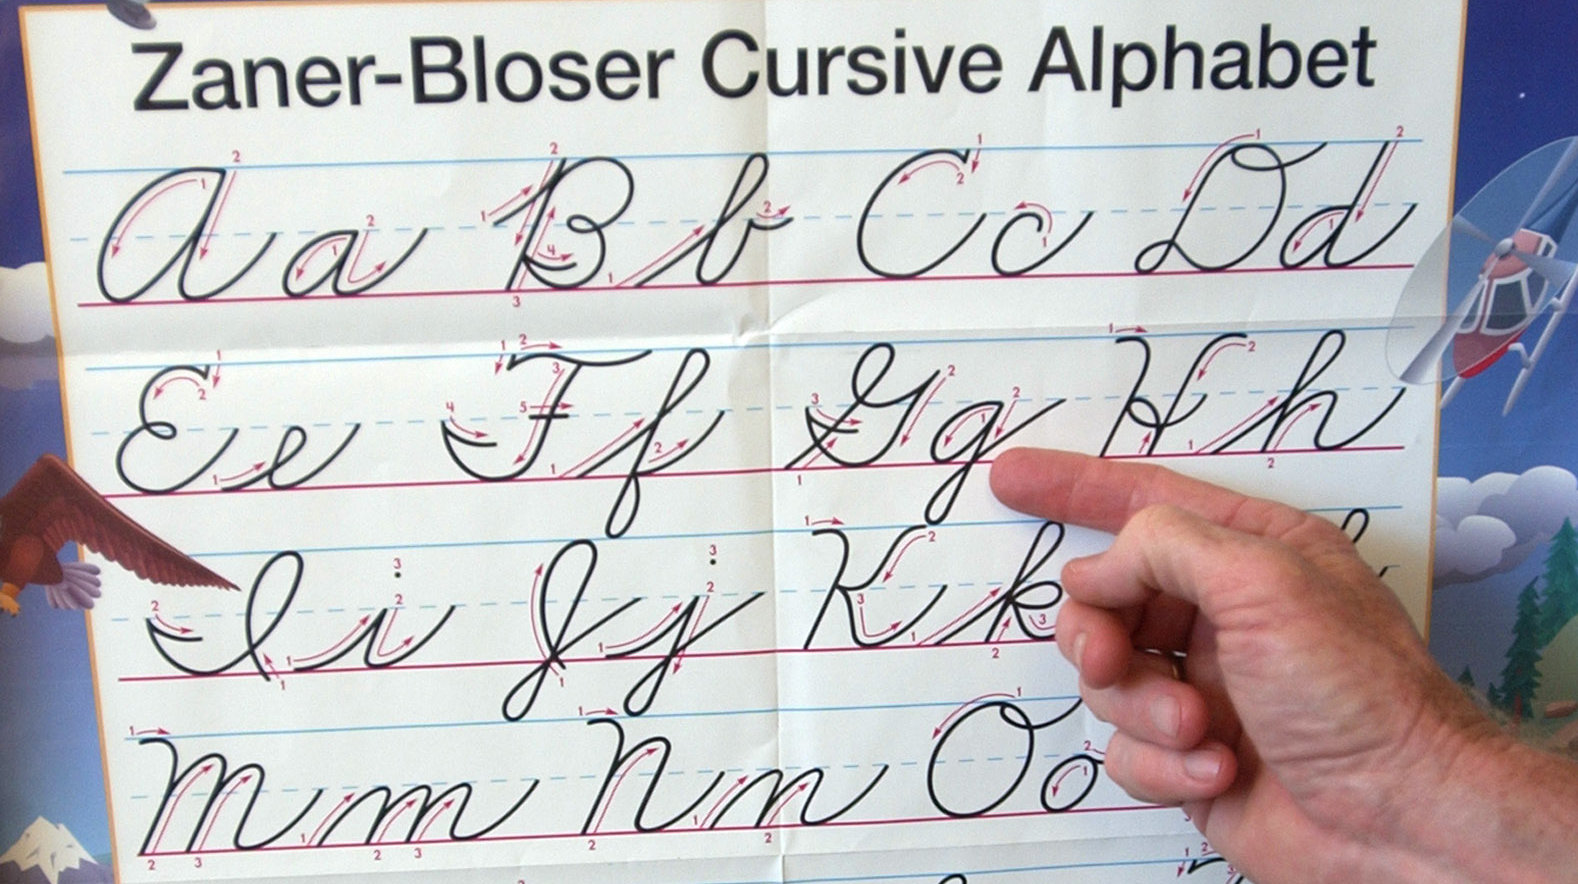 While Common Core standards don't include cursive handwriting